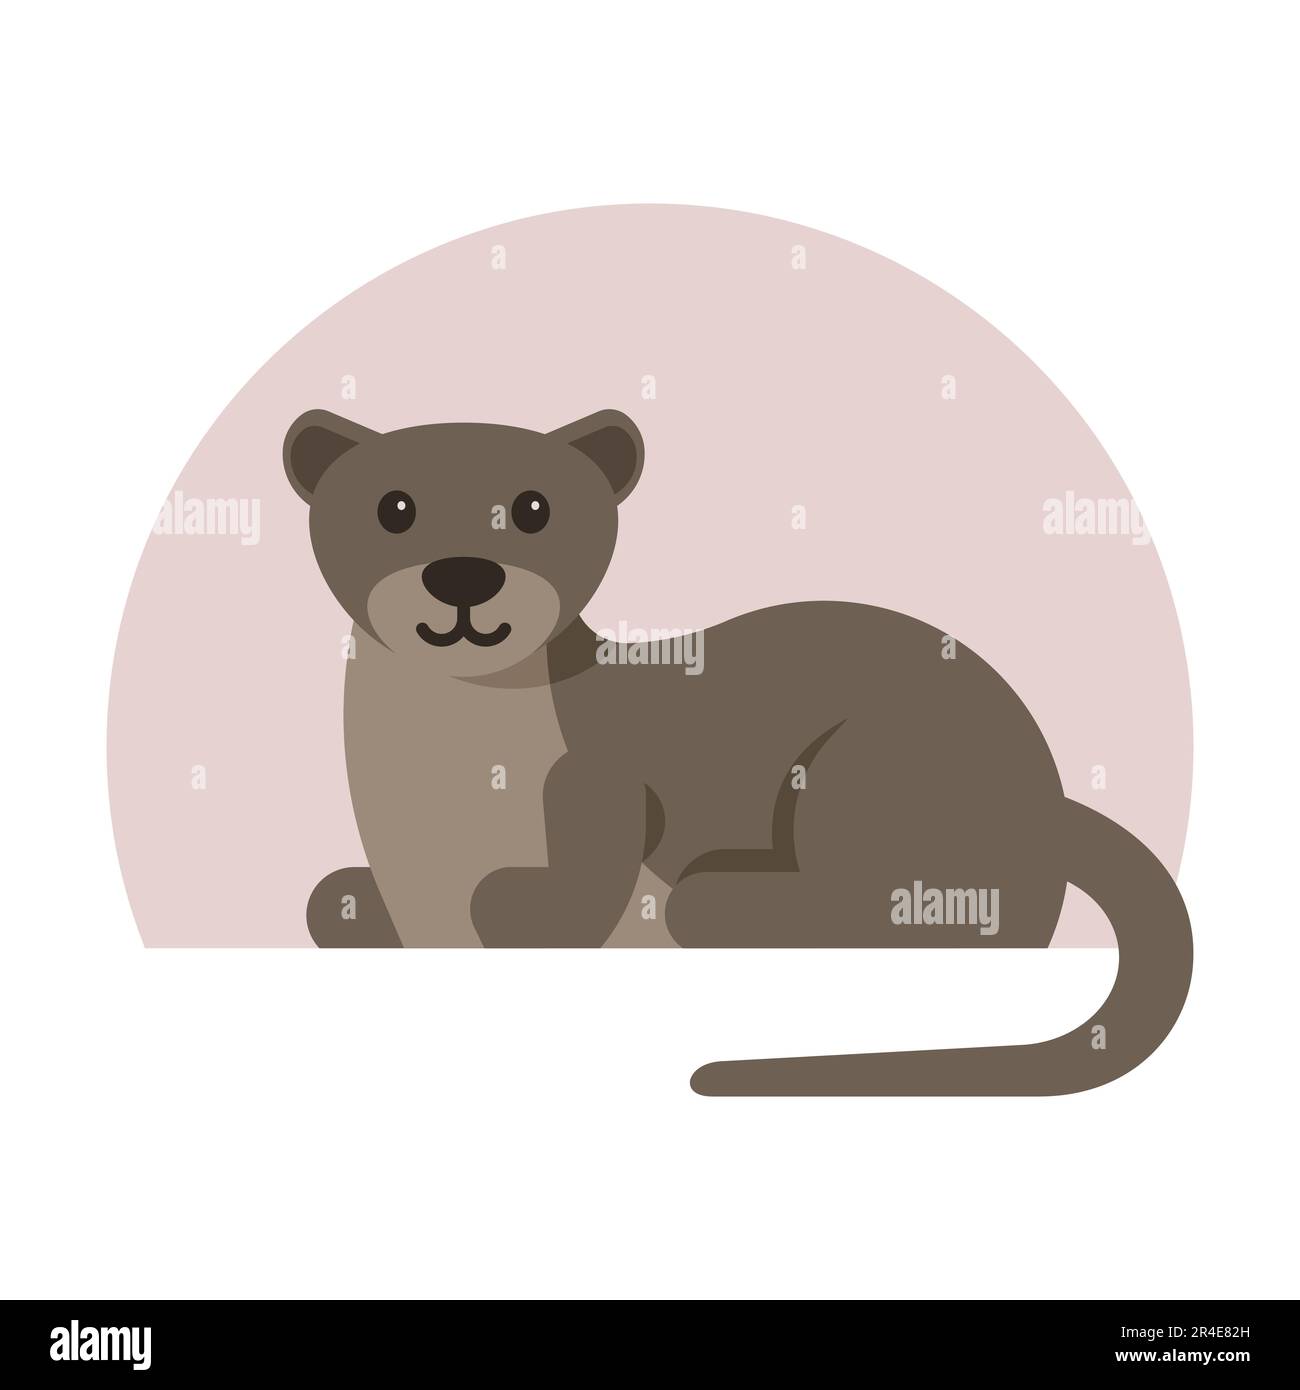 Cute otter flat icon. Vector illustration of a cute otter. Stock Vector